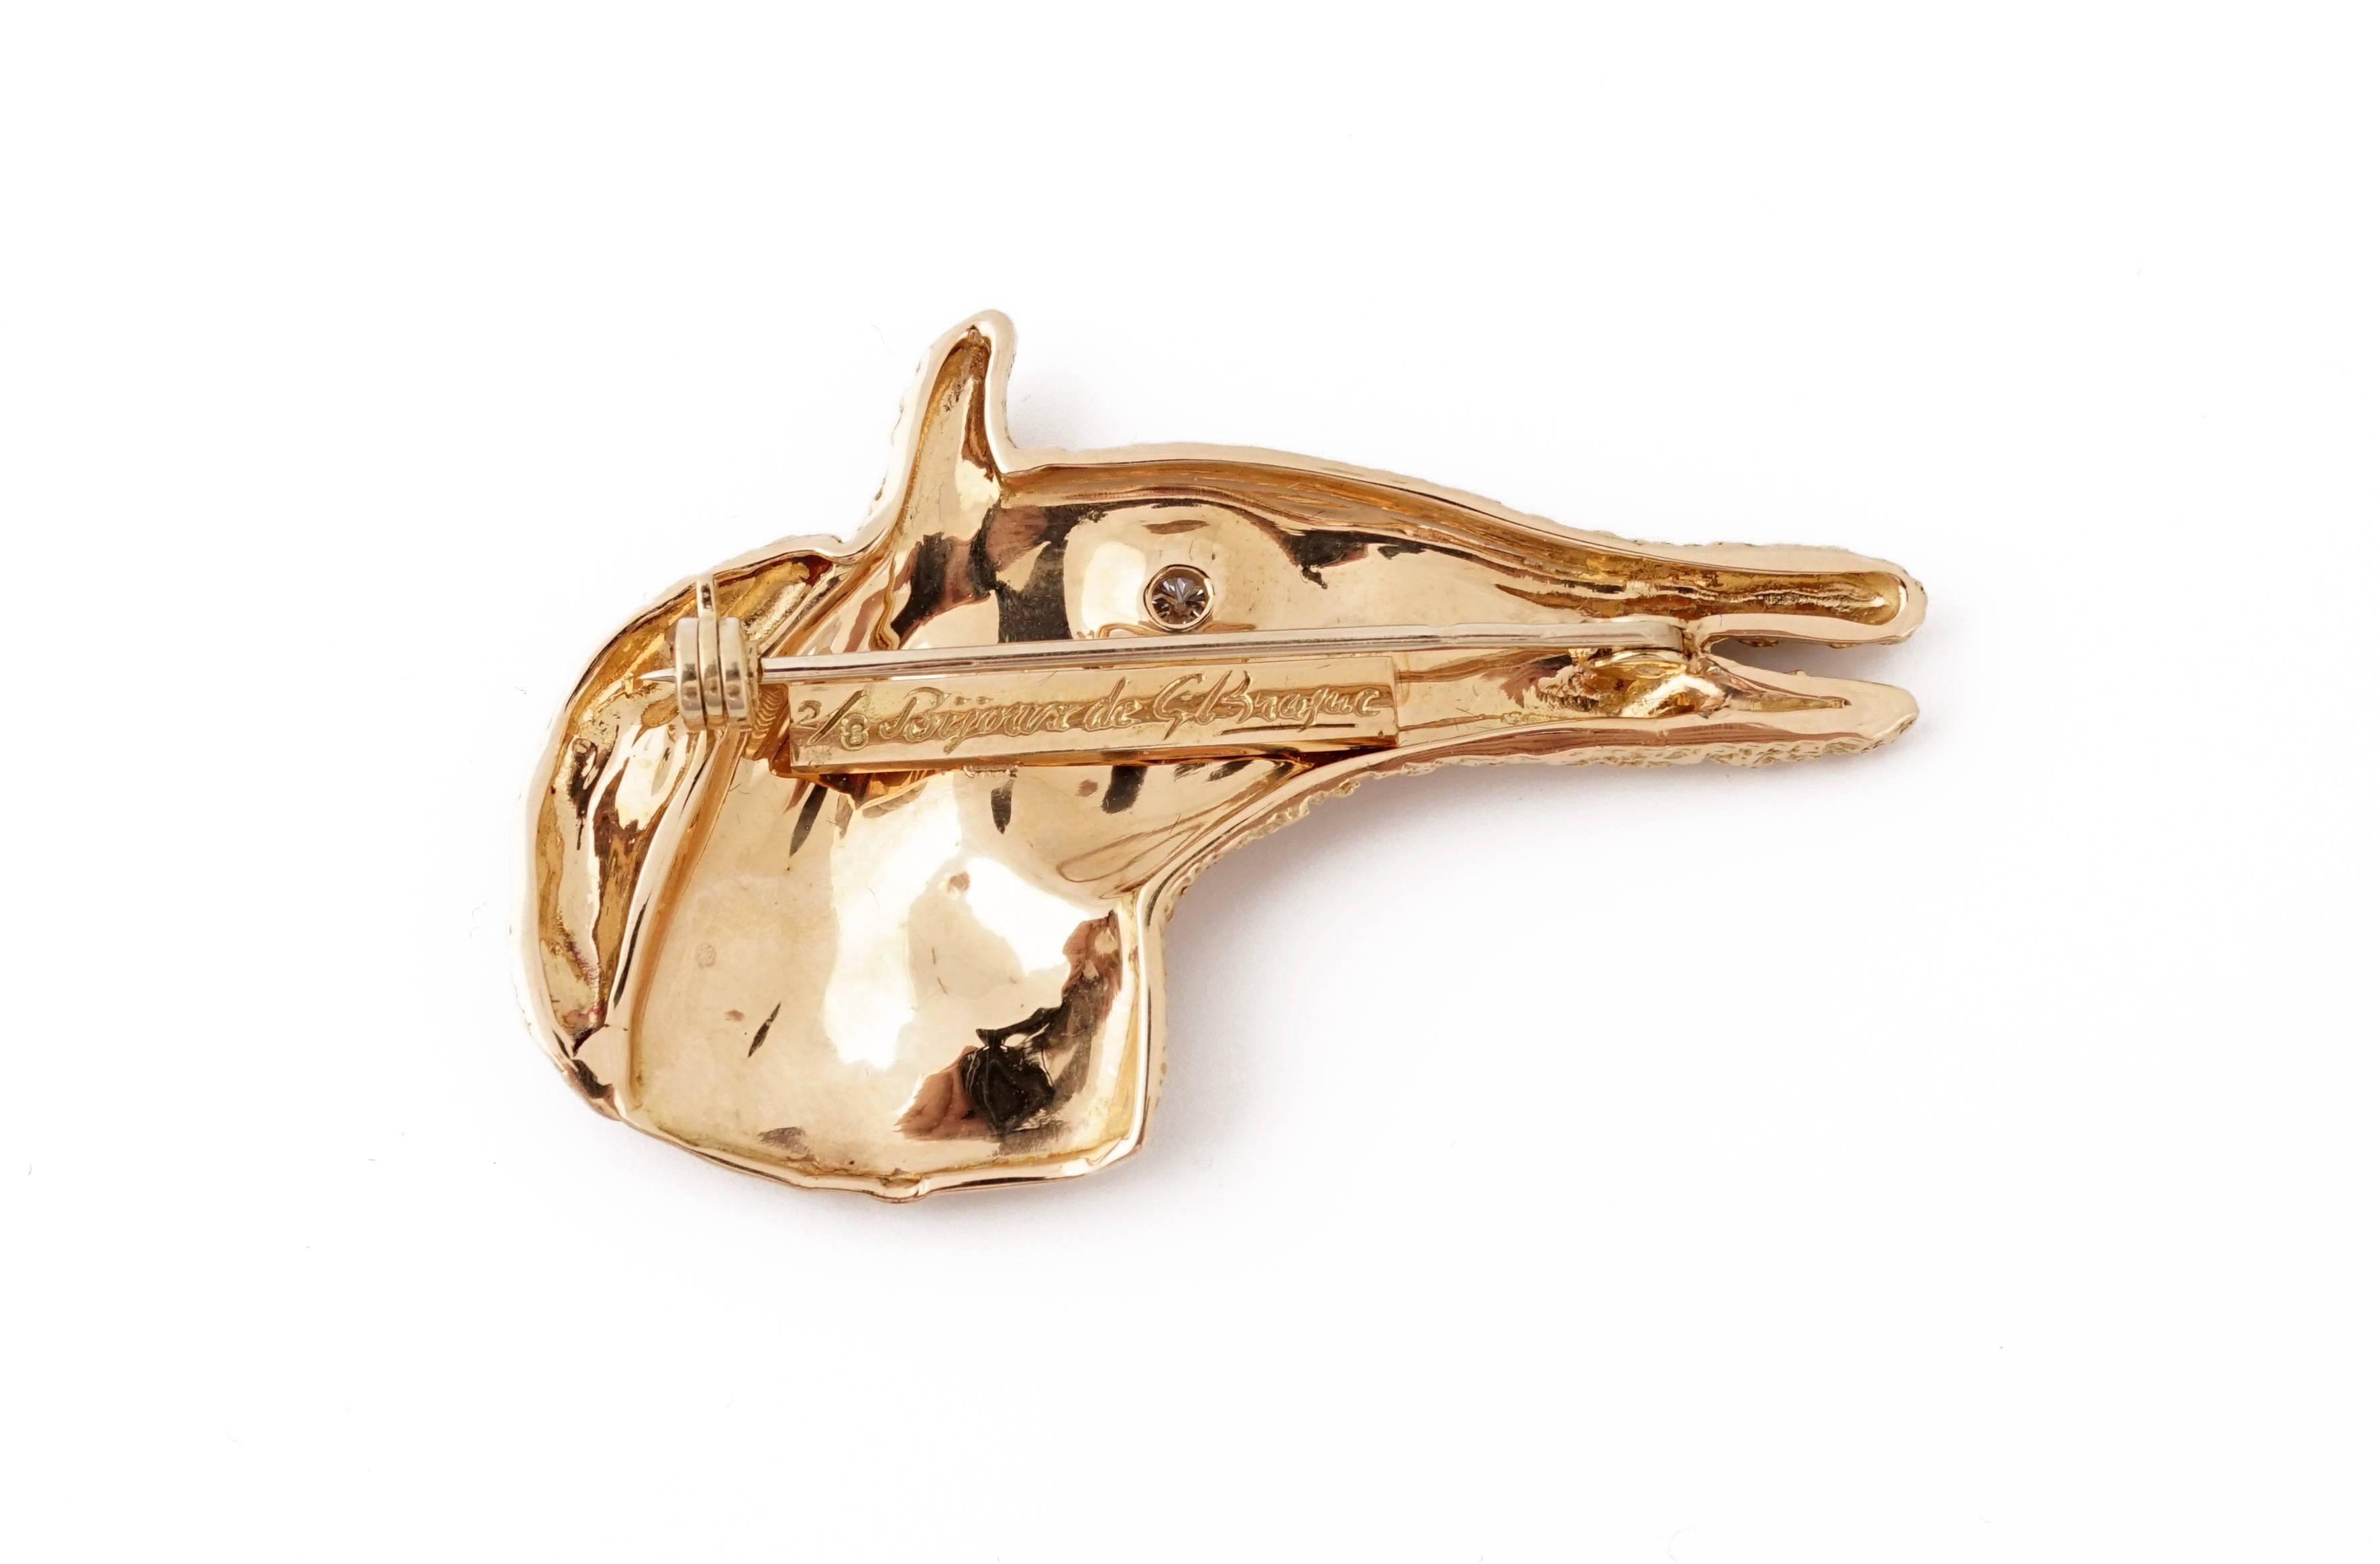 Express Shipping insured during the Lockdown

Beautiful 18K gold and Cut Diamond brooch by Georges Braque (1882-1963), inventor of cubism. 
It is called Areion
Signed and numbered 2/8 (Picture 2).
It was manufactured by Heger de Loewenfeld after the